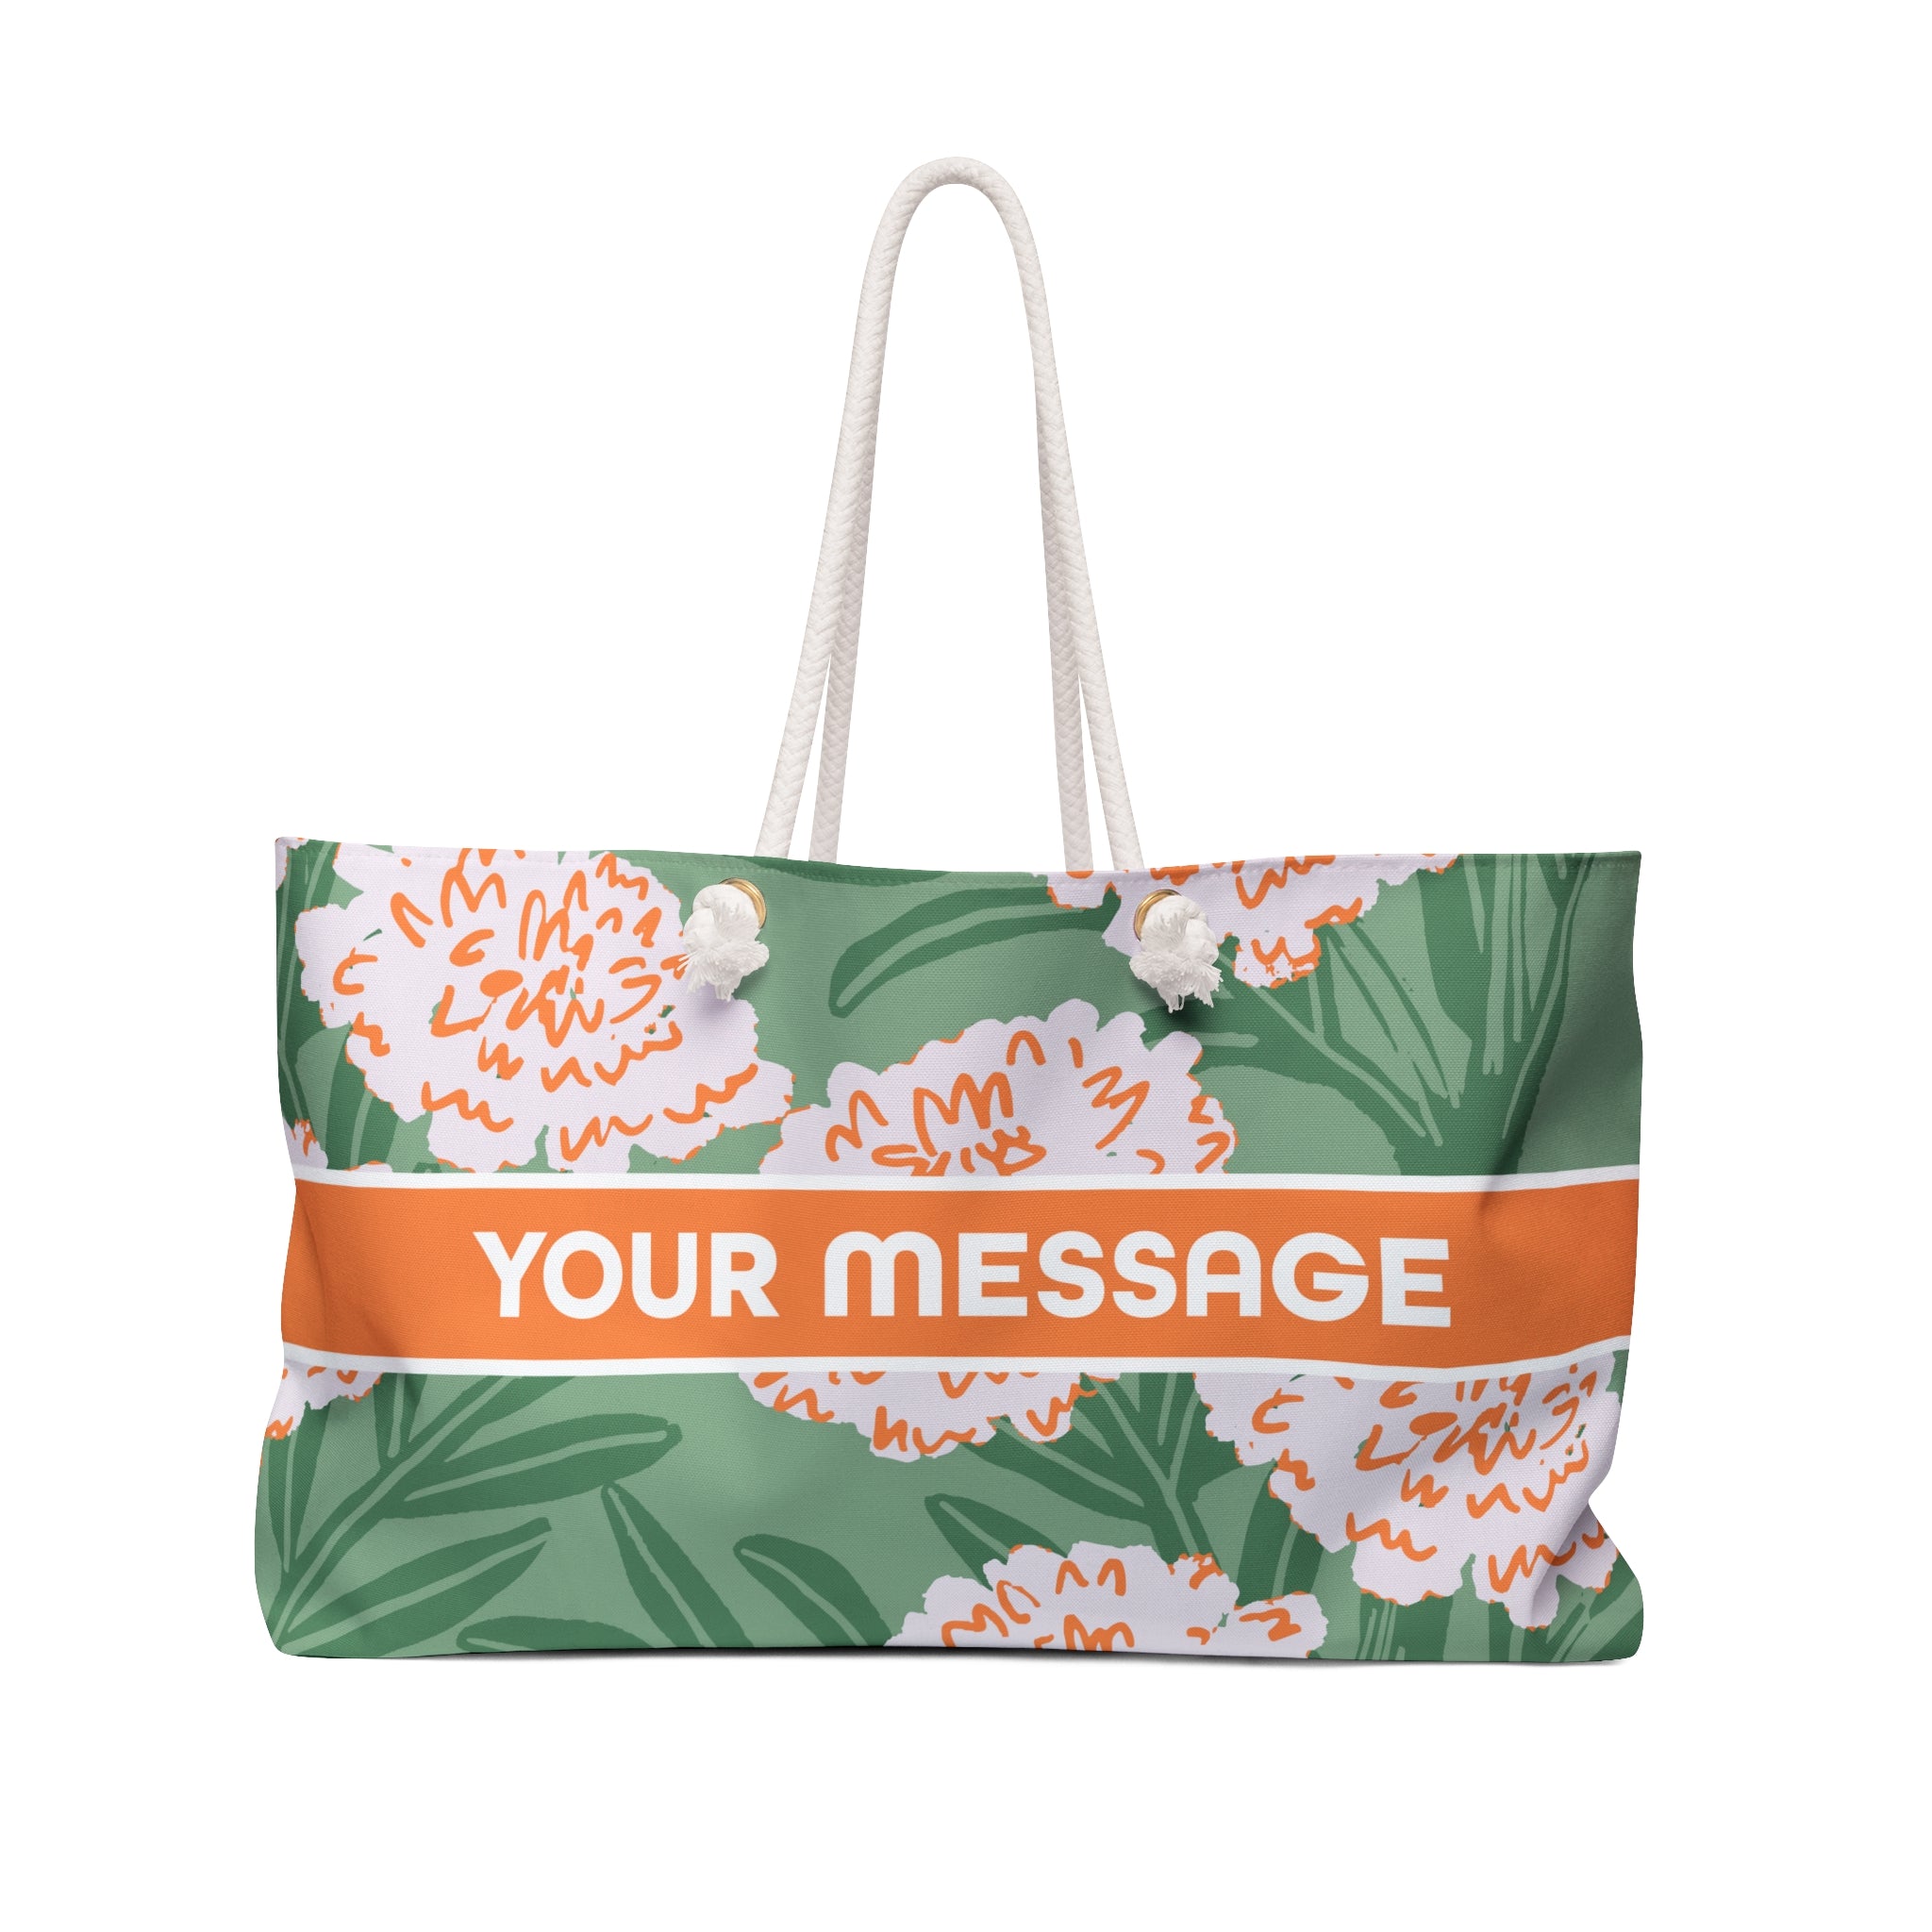 October marigold birthday flower print on a personalized tote bag